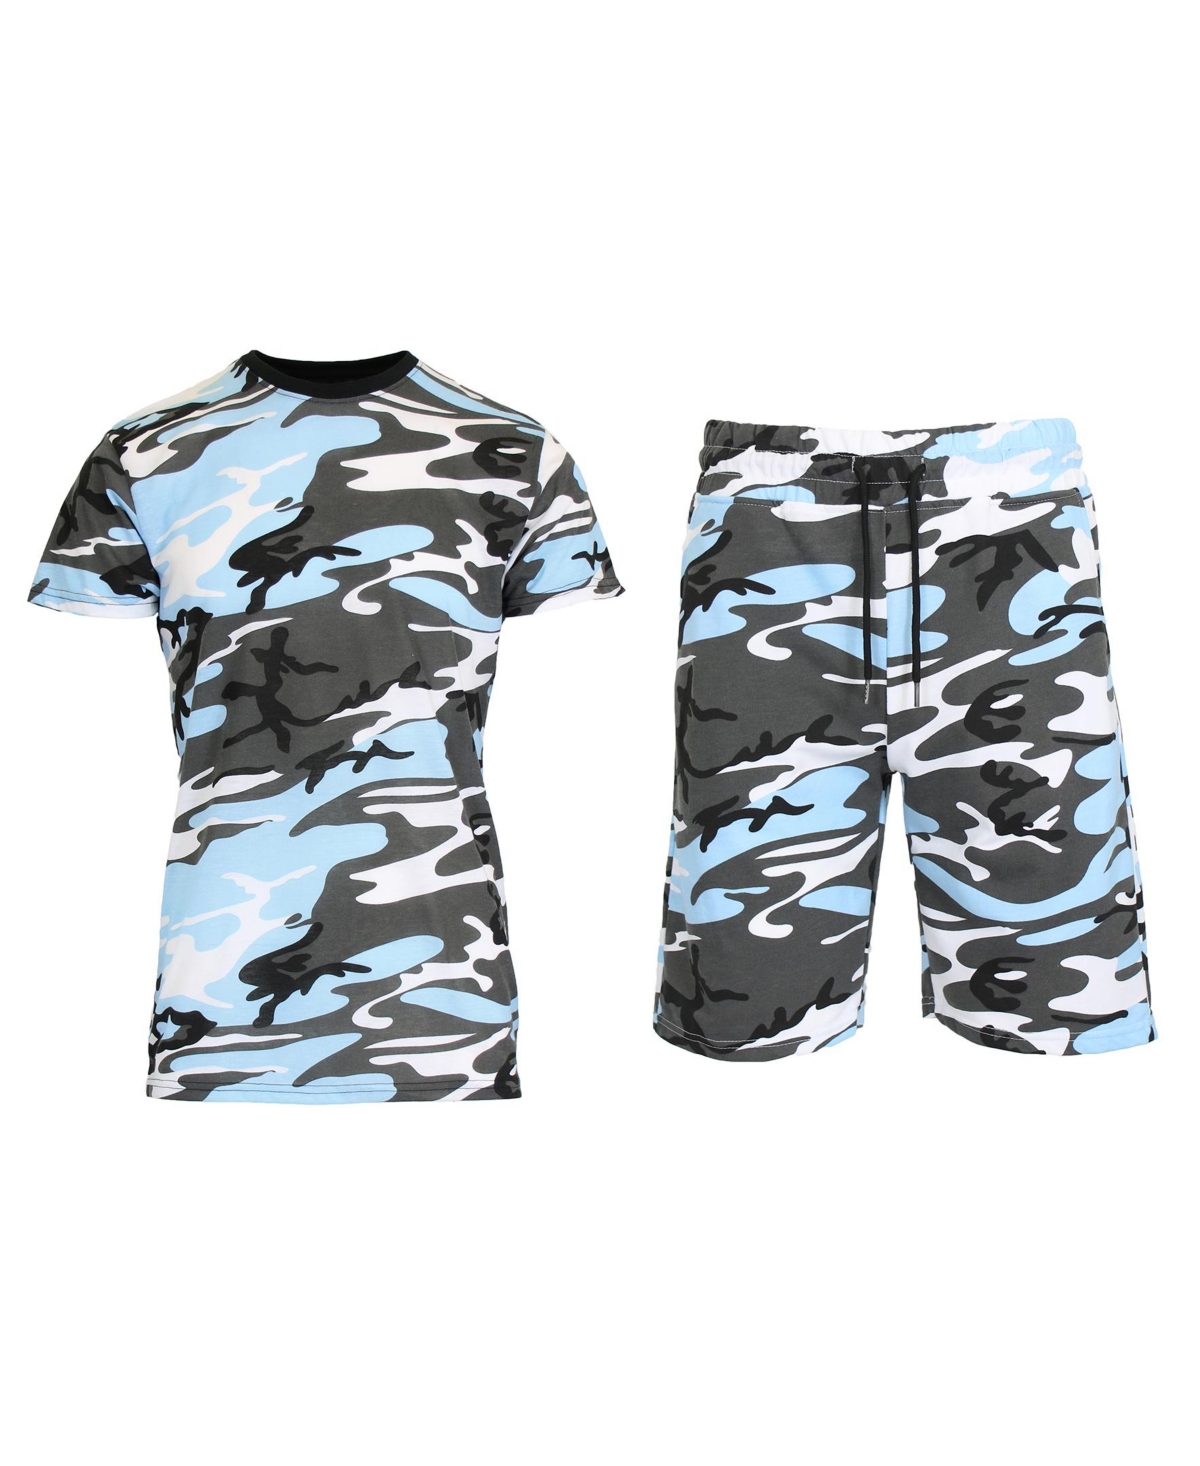 Galaxy By Harvic Men's Camo Short Sleeve T-shirt And Shorts, 2-piece Set In Light Blue Camo